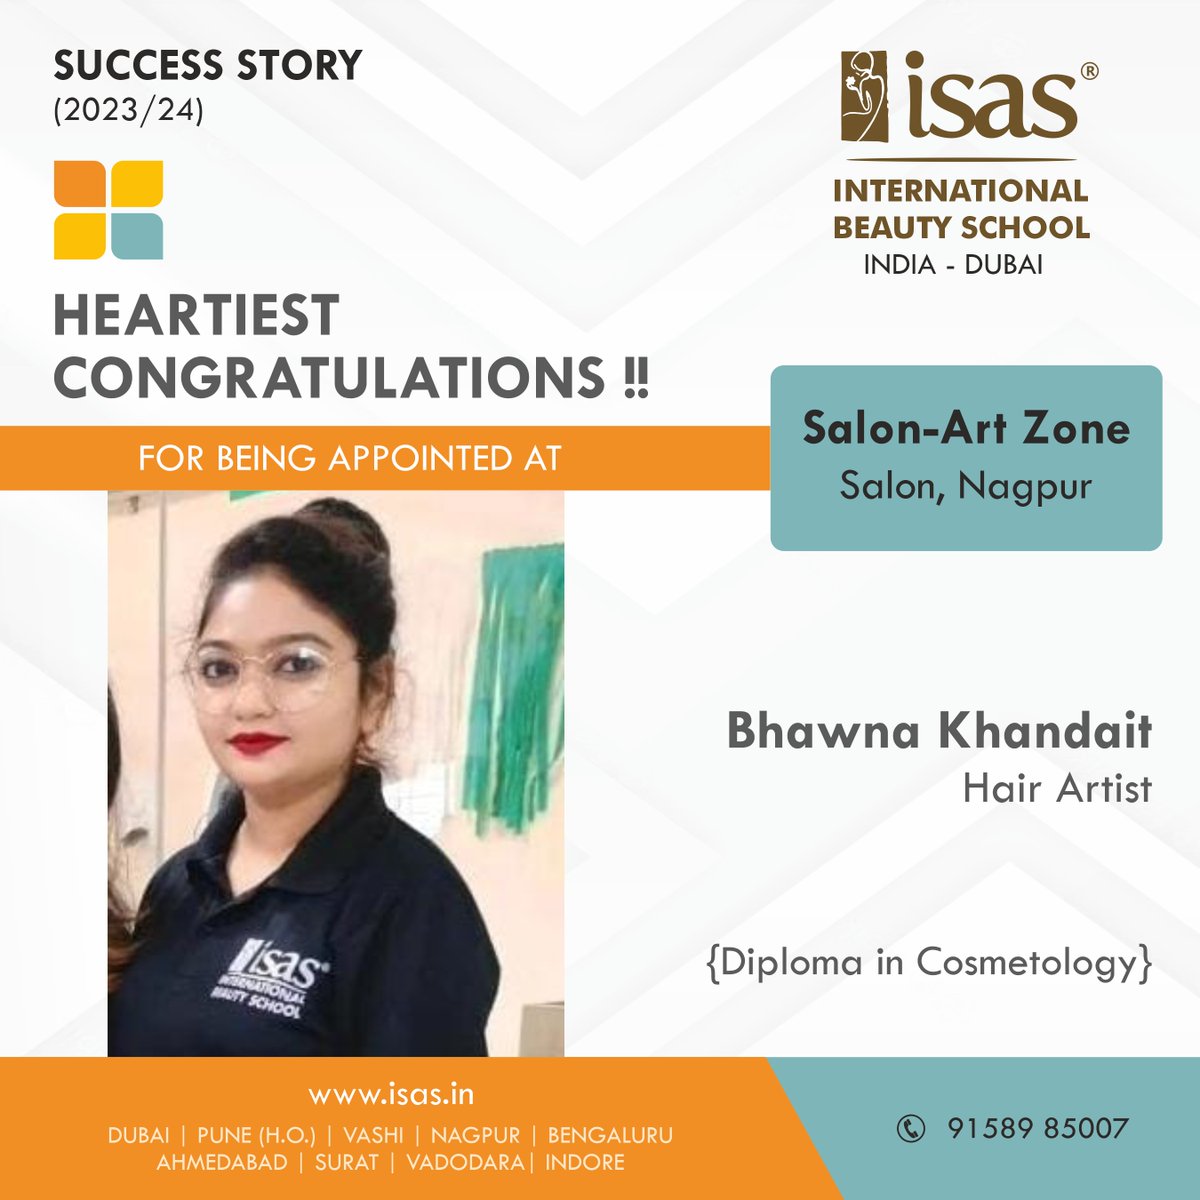 isas.in

#ISAS #studentplacement #studentsuccessstory #bestluck #beautyschool #hair #hairstyle #beauty #hairstyles #haircut #fashion #hairstylist #makeup #haircolor #love #congratulations #creativecareer #style #beautiful #balayage #barber #model #hairdresser